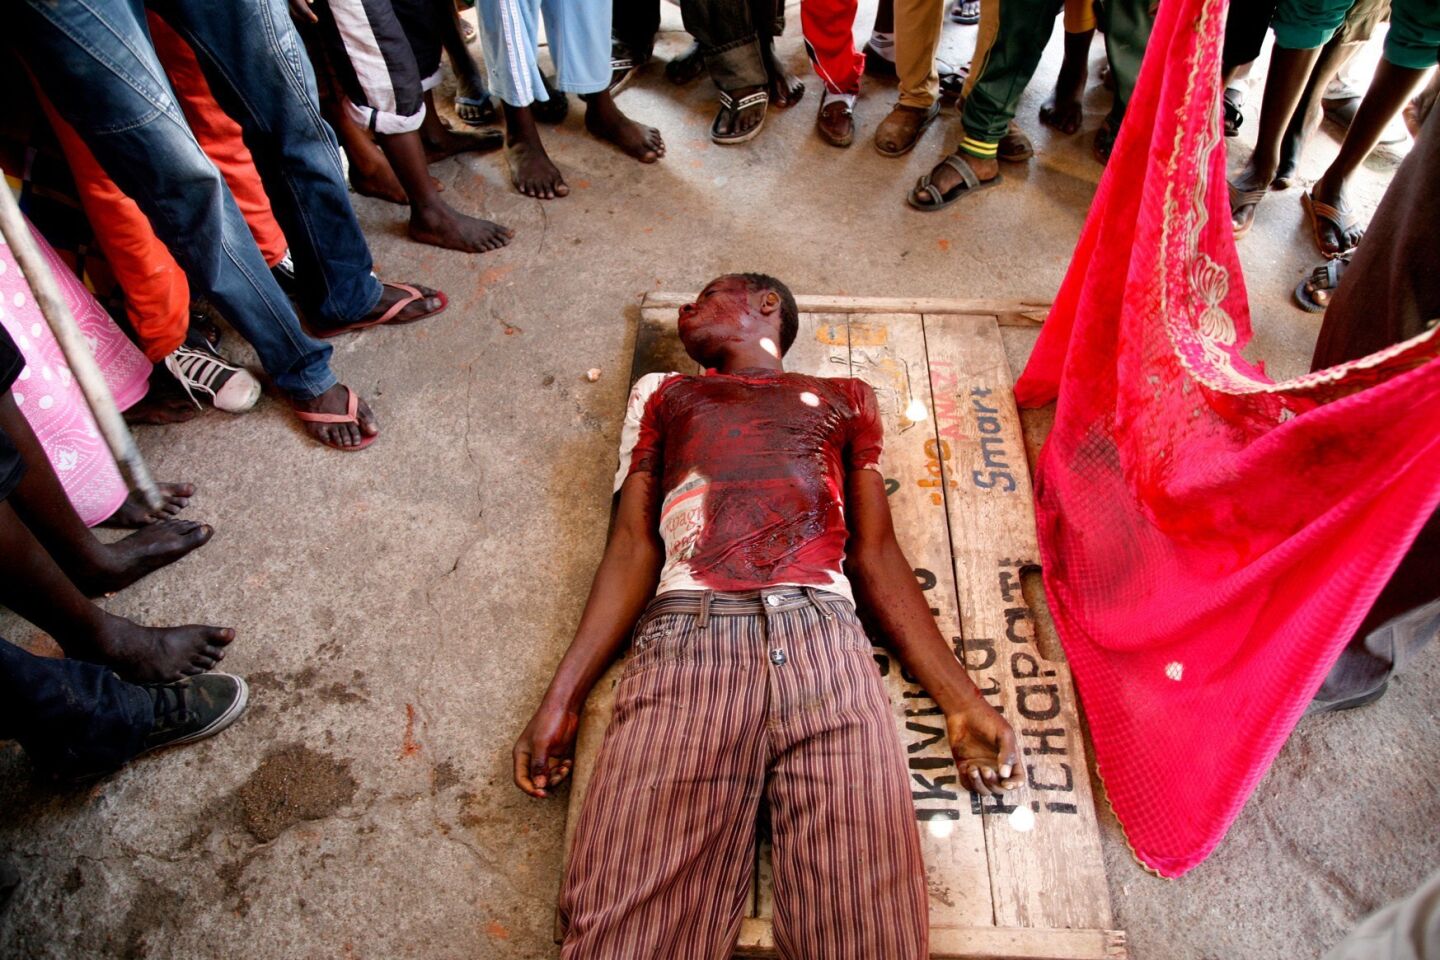 Protesters stand next to the body of a man who died May 12 in clashes with police in Burundi's capital, Bujumbura.